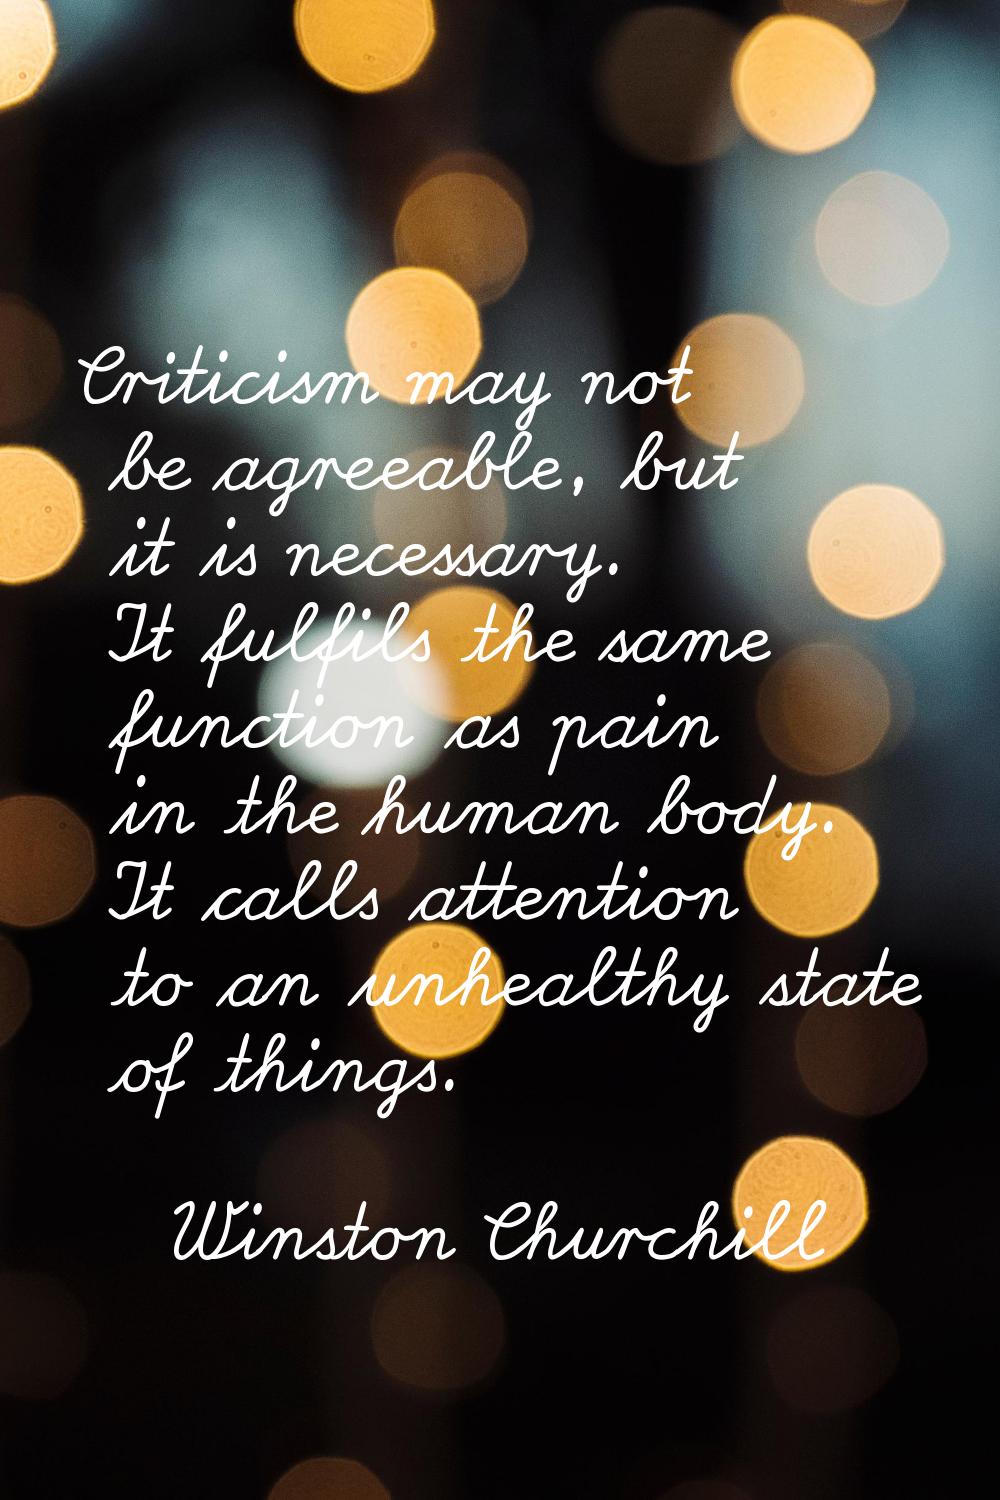 Criticism may not be agreeable, but it is necessary. It fulfils the same function as pain in the hu